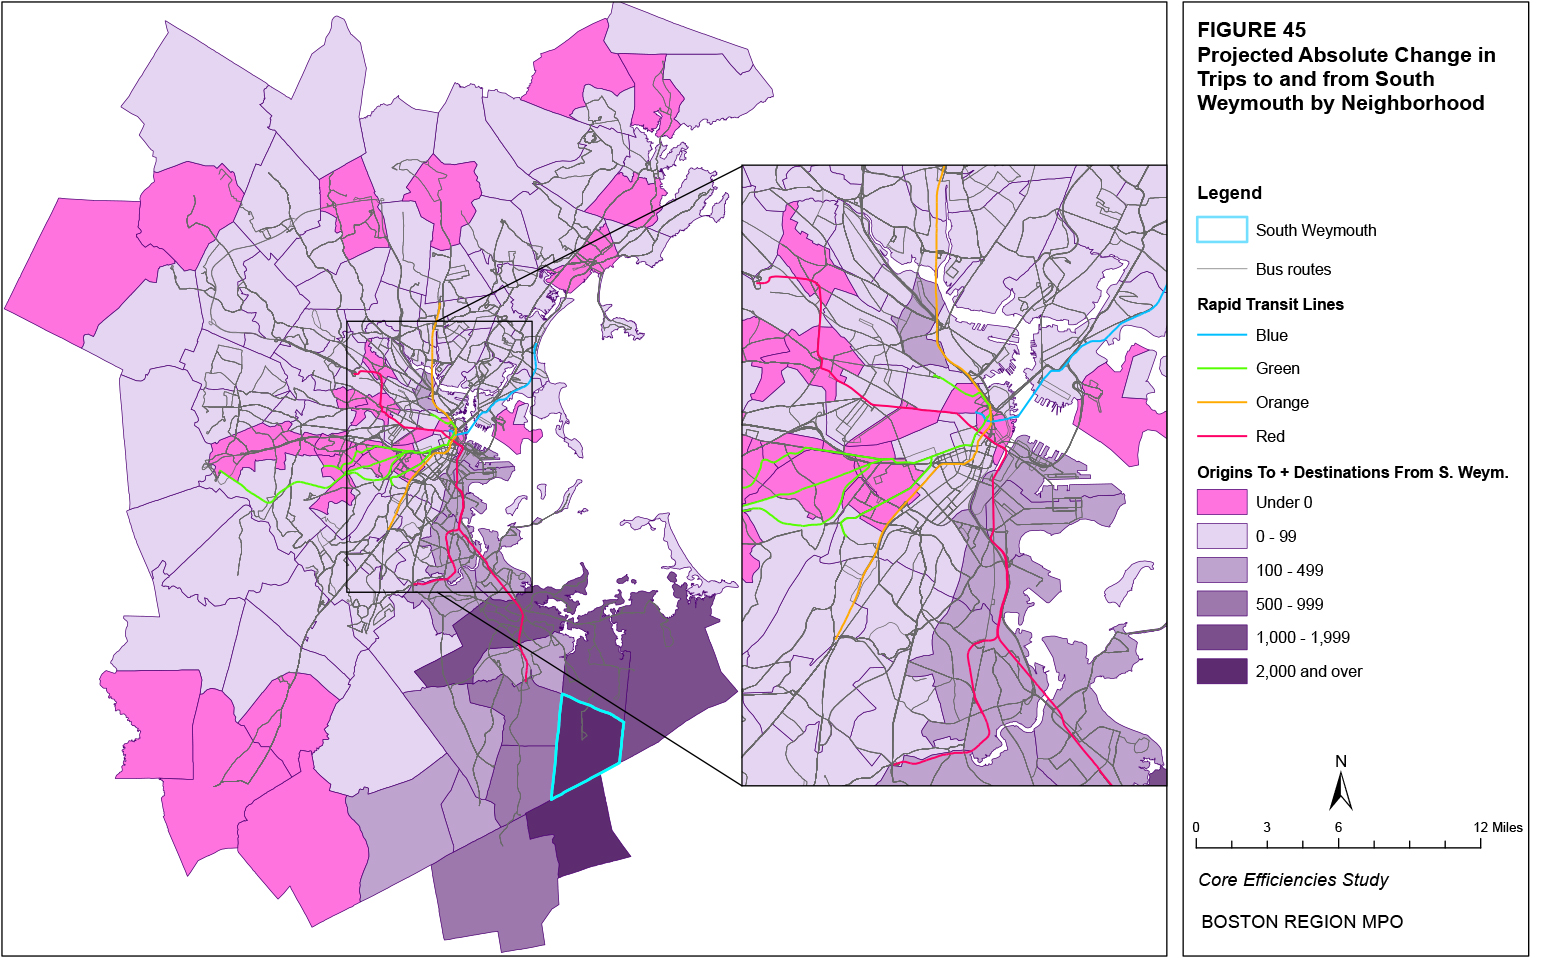 This map shows the projected absolute change in trips to and from the South Weymouth neighborhood by neighborhood.